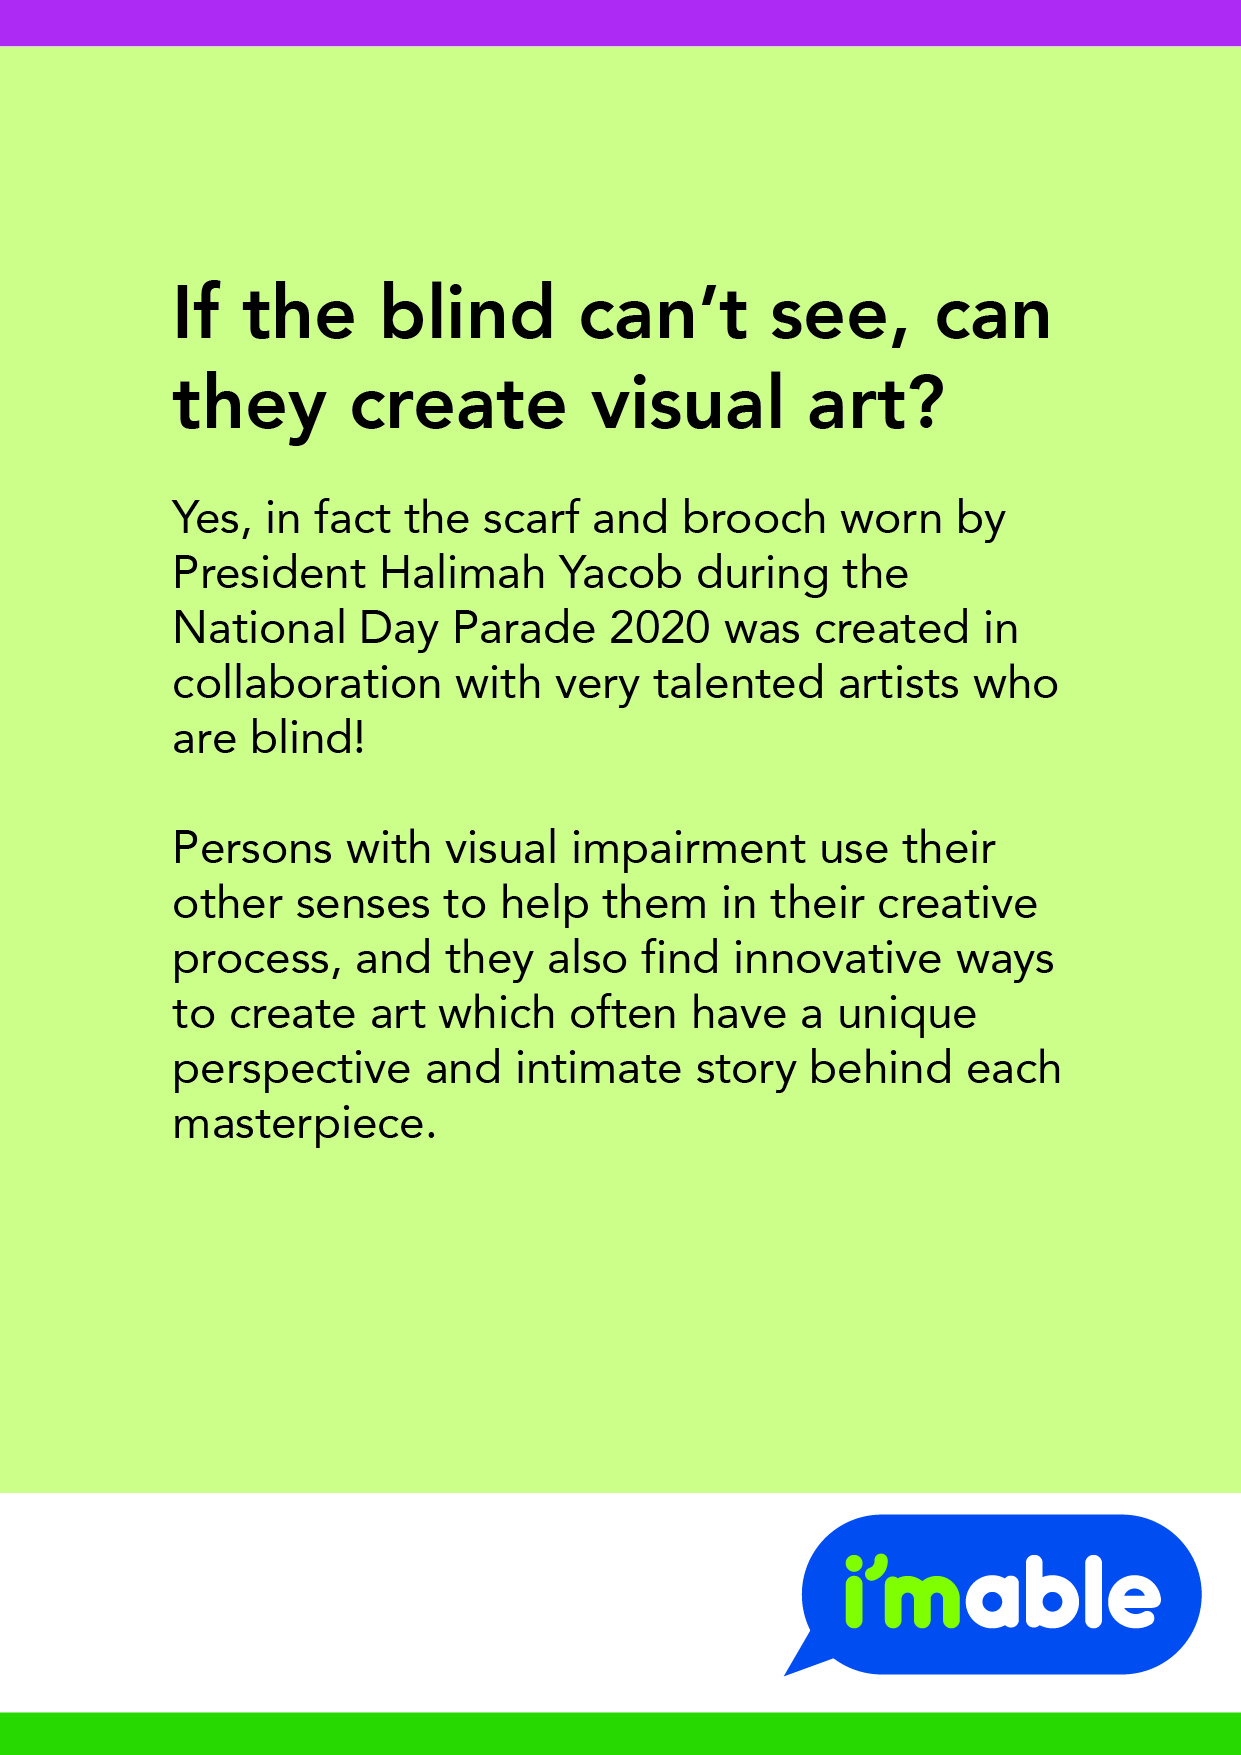 Explanation of how the visually impaired can create visual art